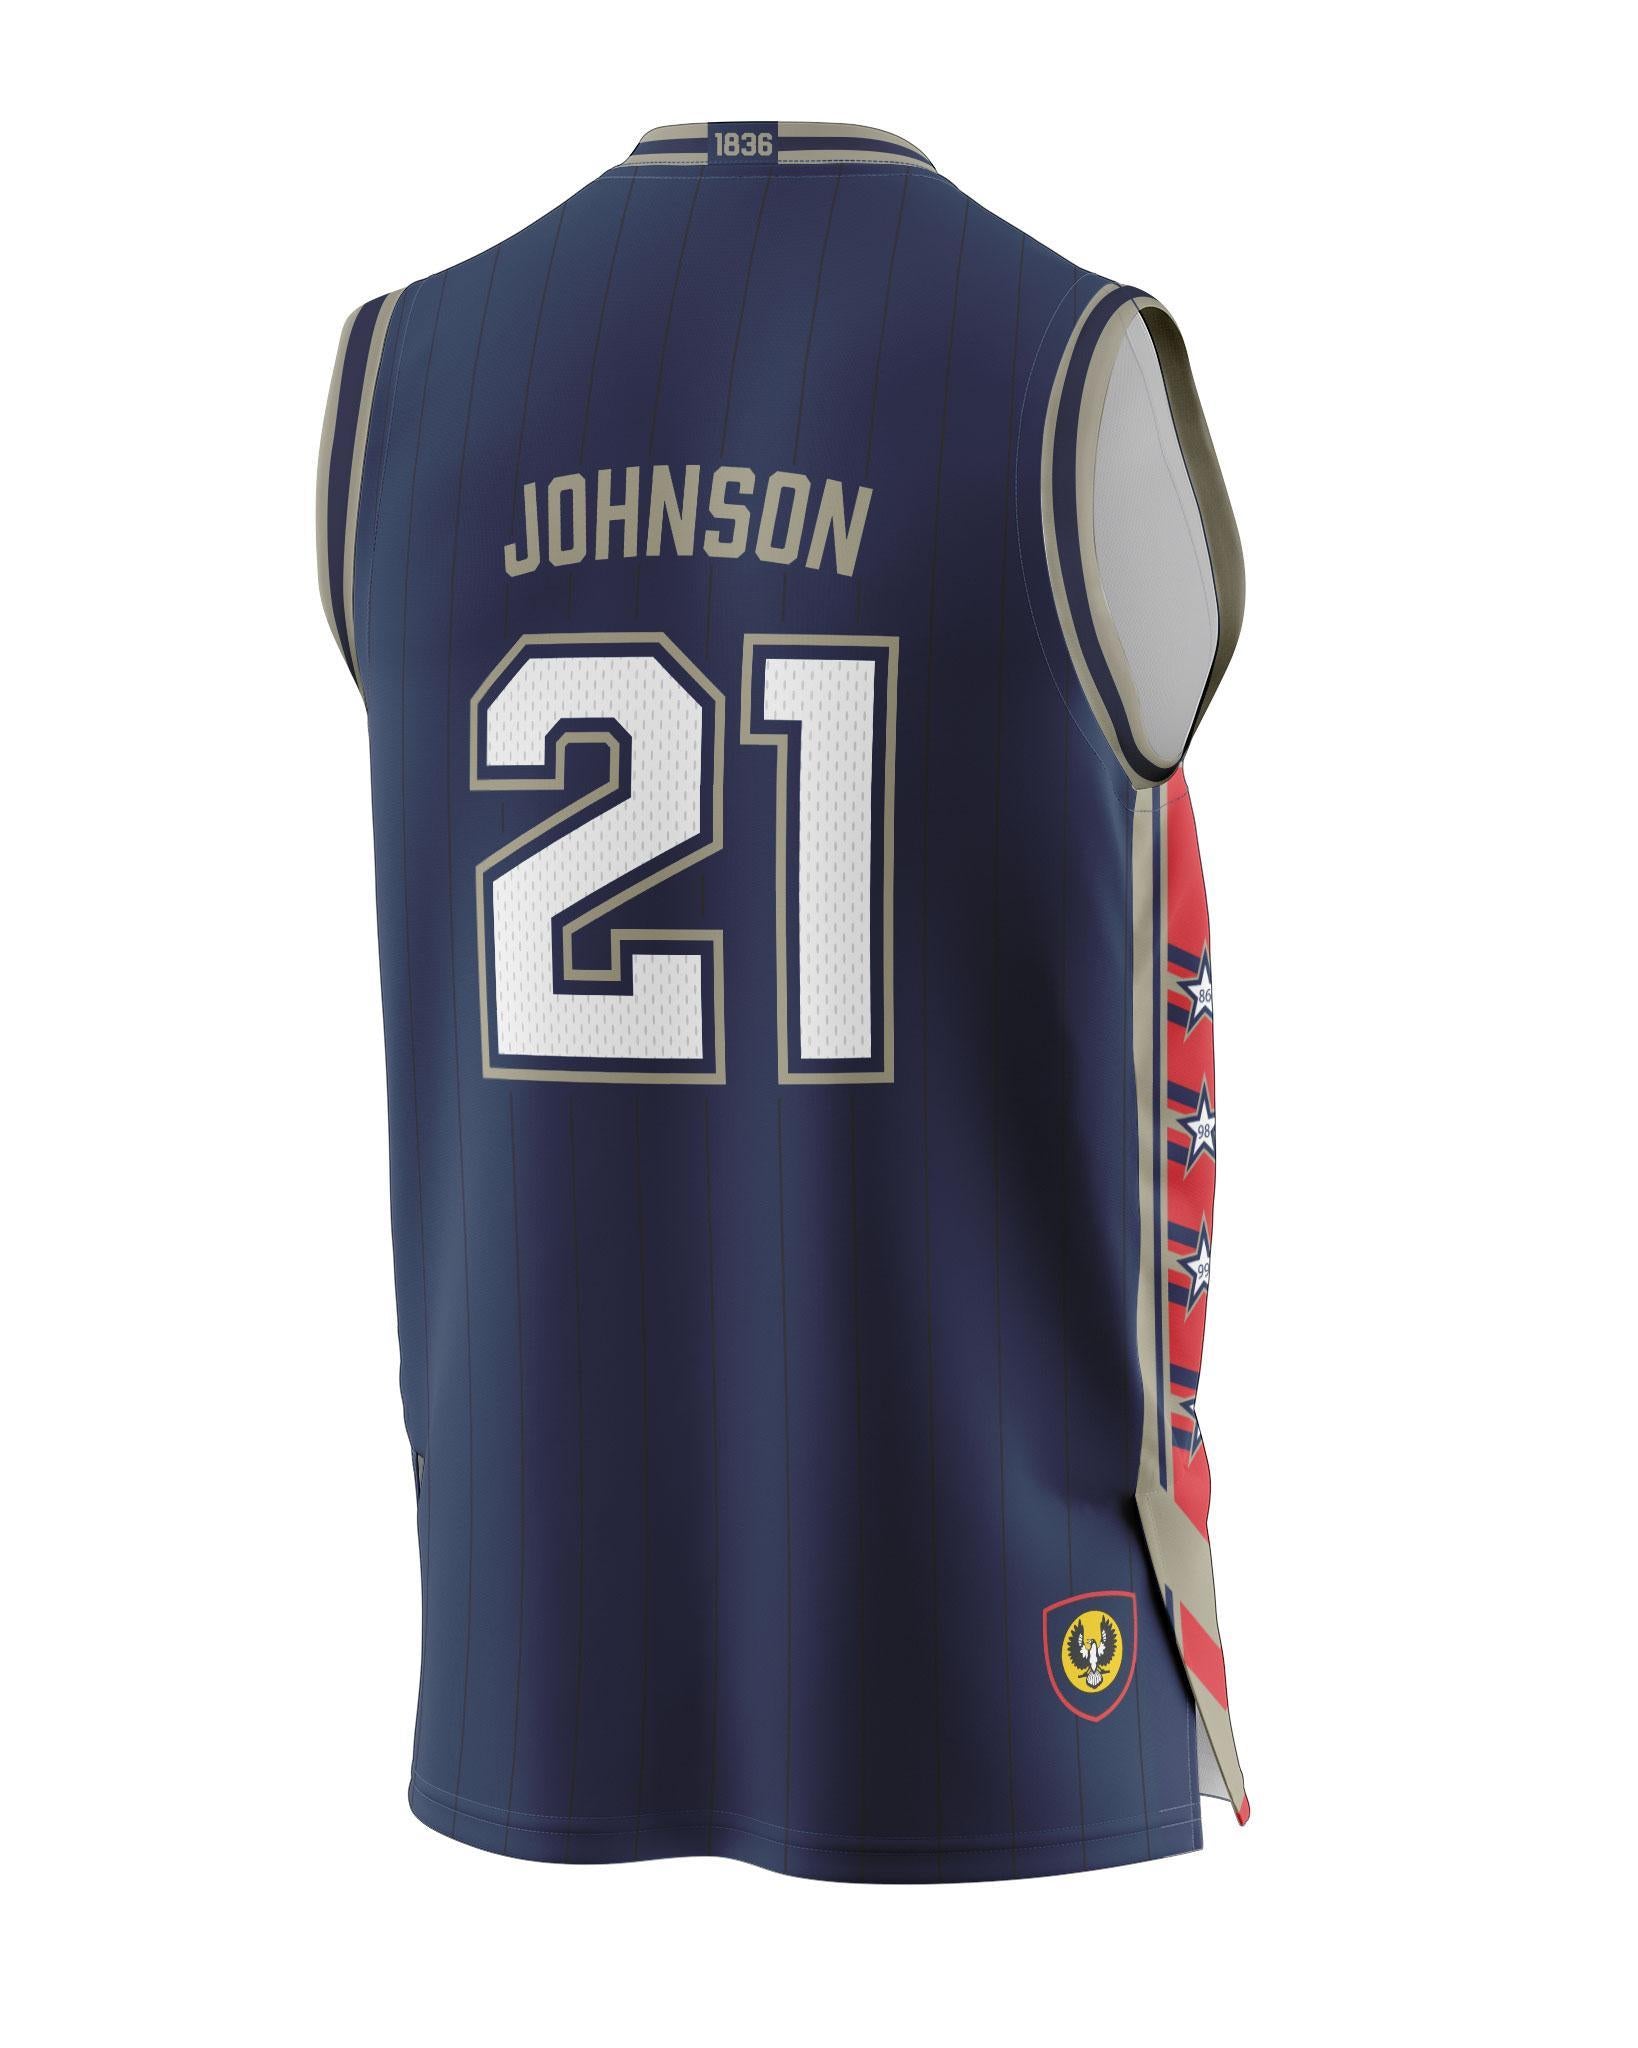 Adelaide 36ers 2021/22 Authentic Adult Home Jersey - Daniel Johnson - Adelaide 36ers